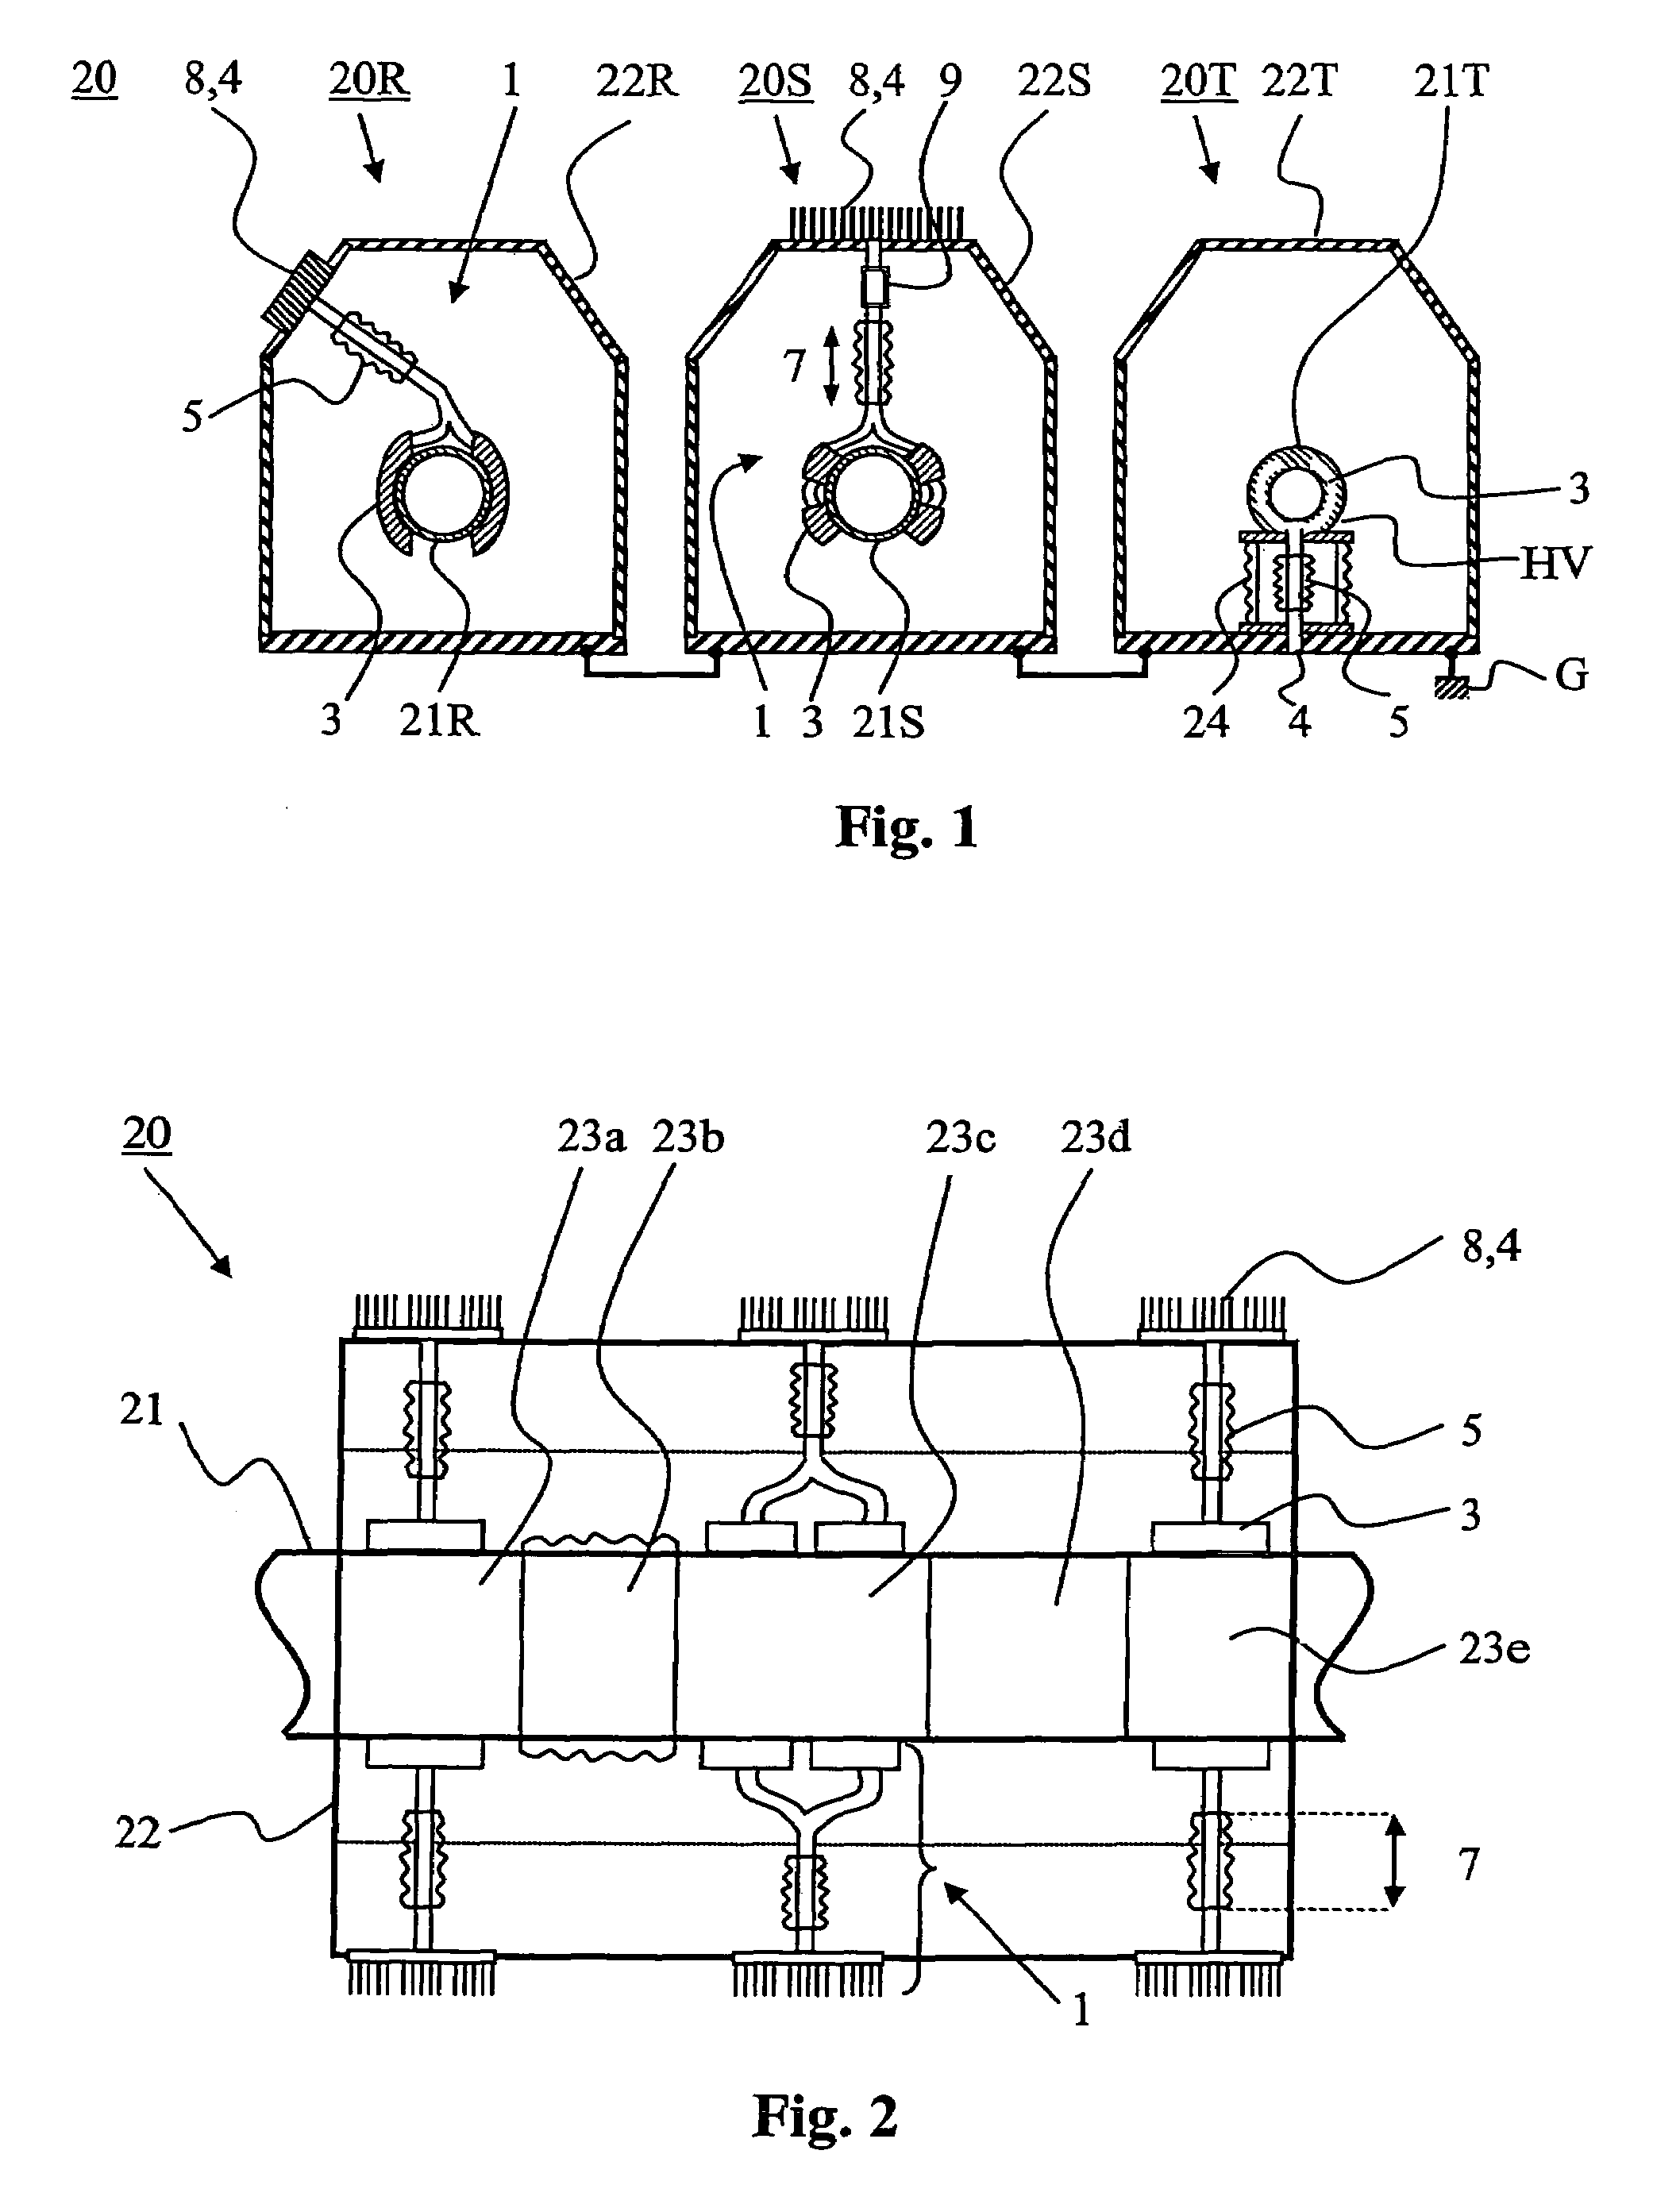 High voltage circuit breaker with cooling